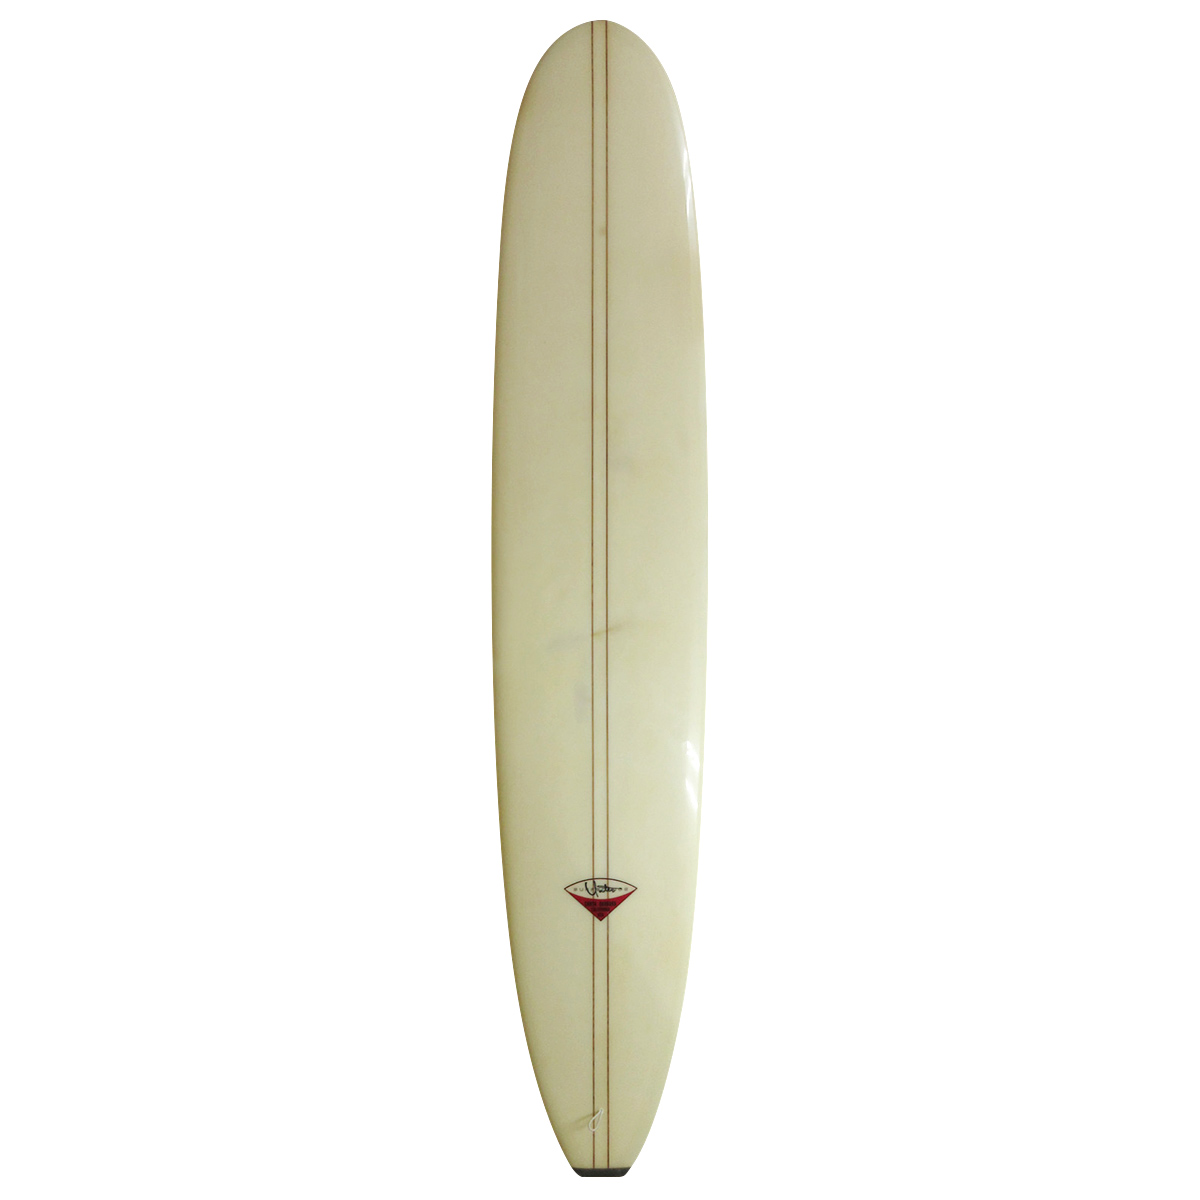 Yater surfboards / SPOON 9`6 Shaped by Renny Yater